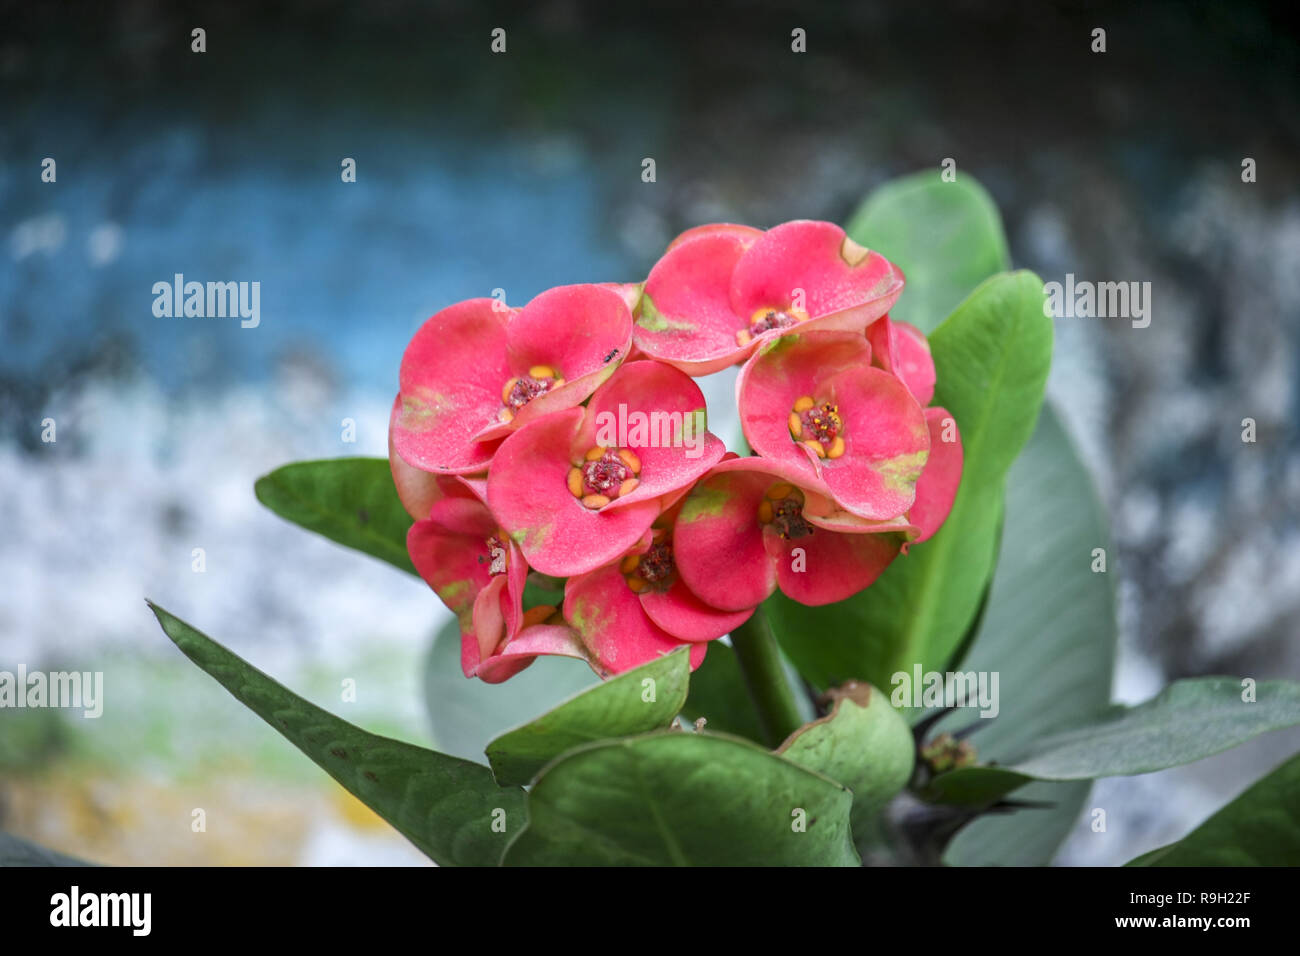 Blooming Flowers- Crown of Thorns Plant Stock Photo